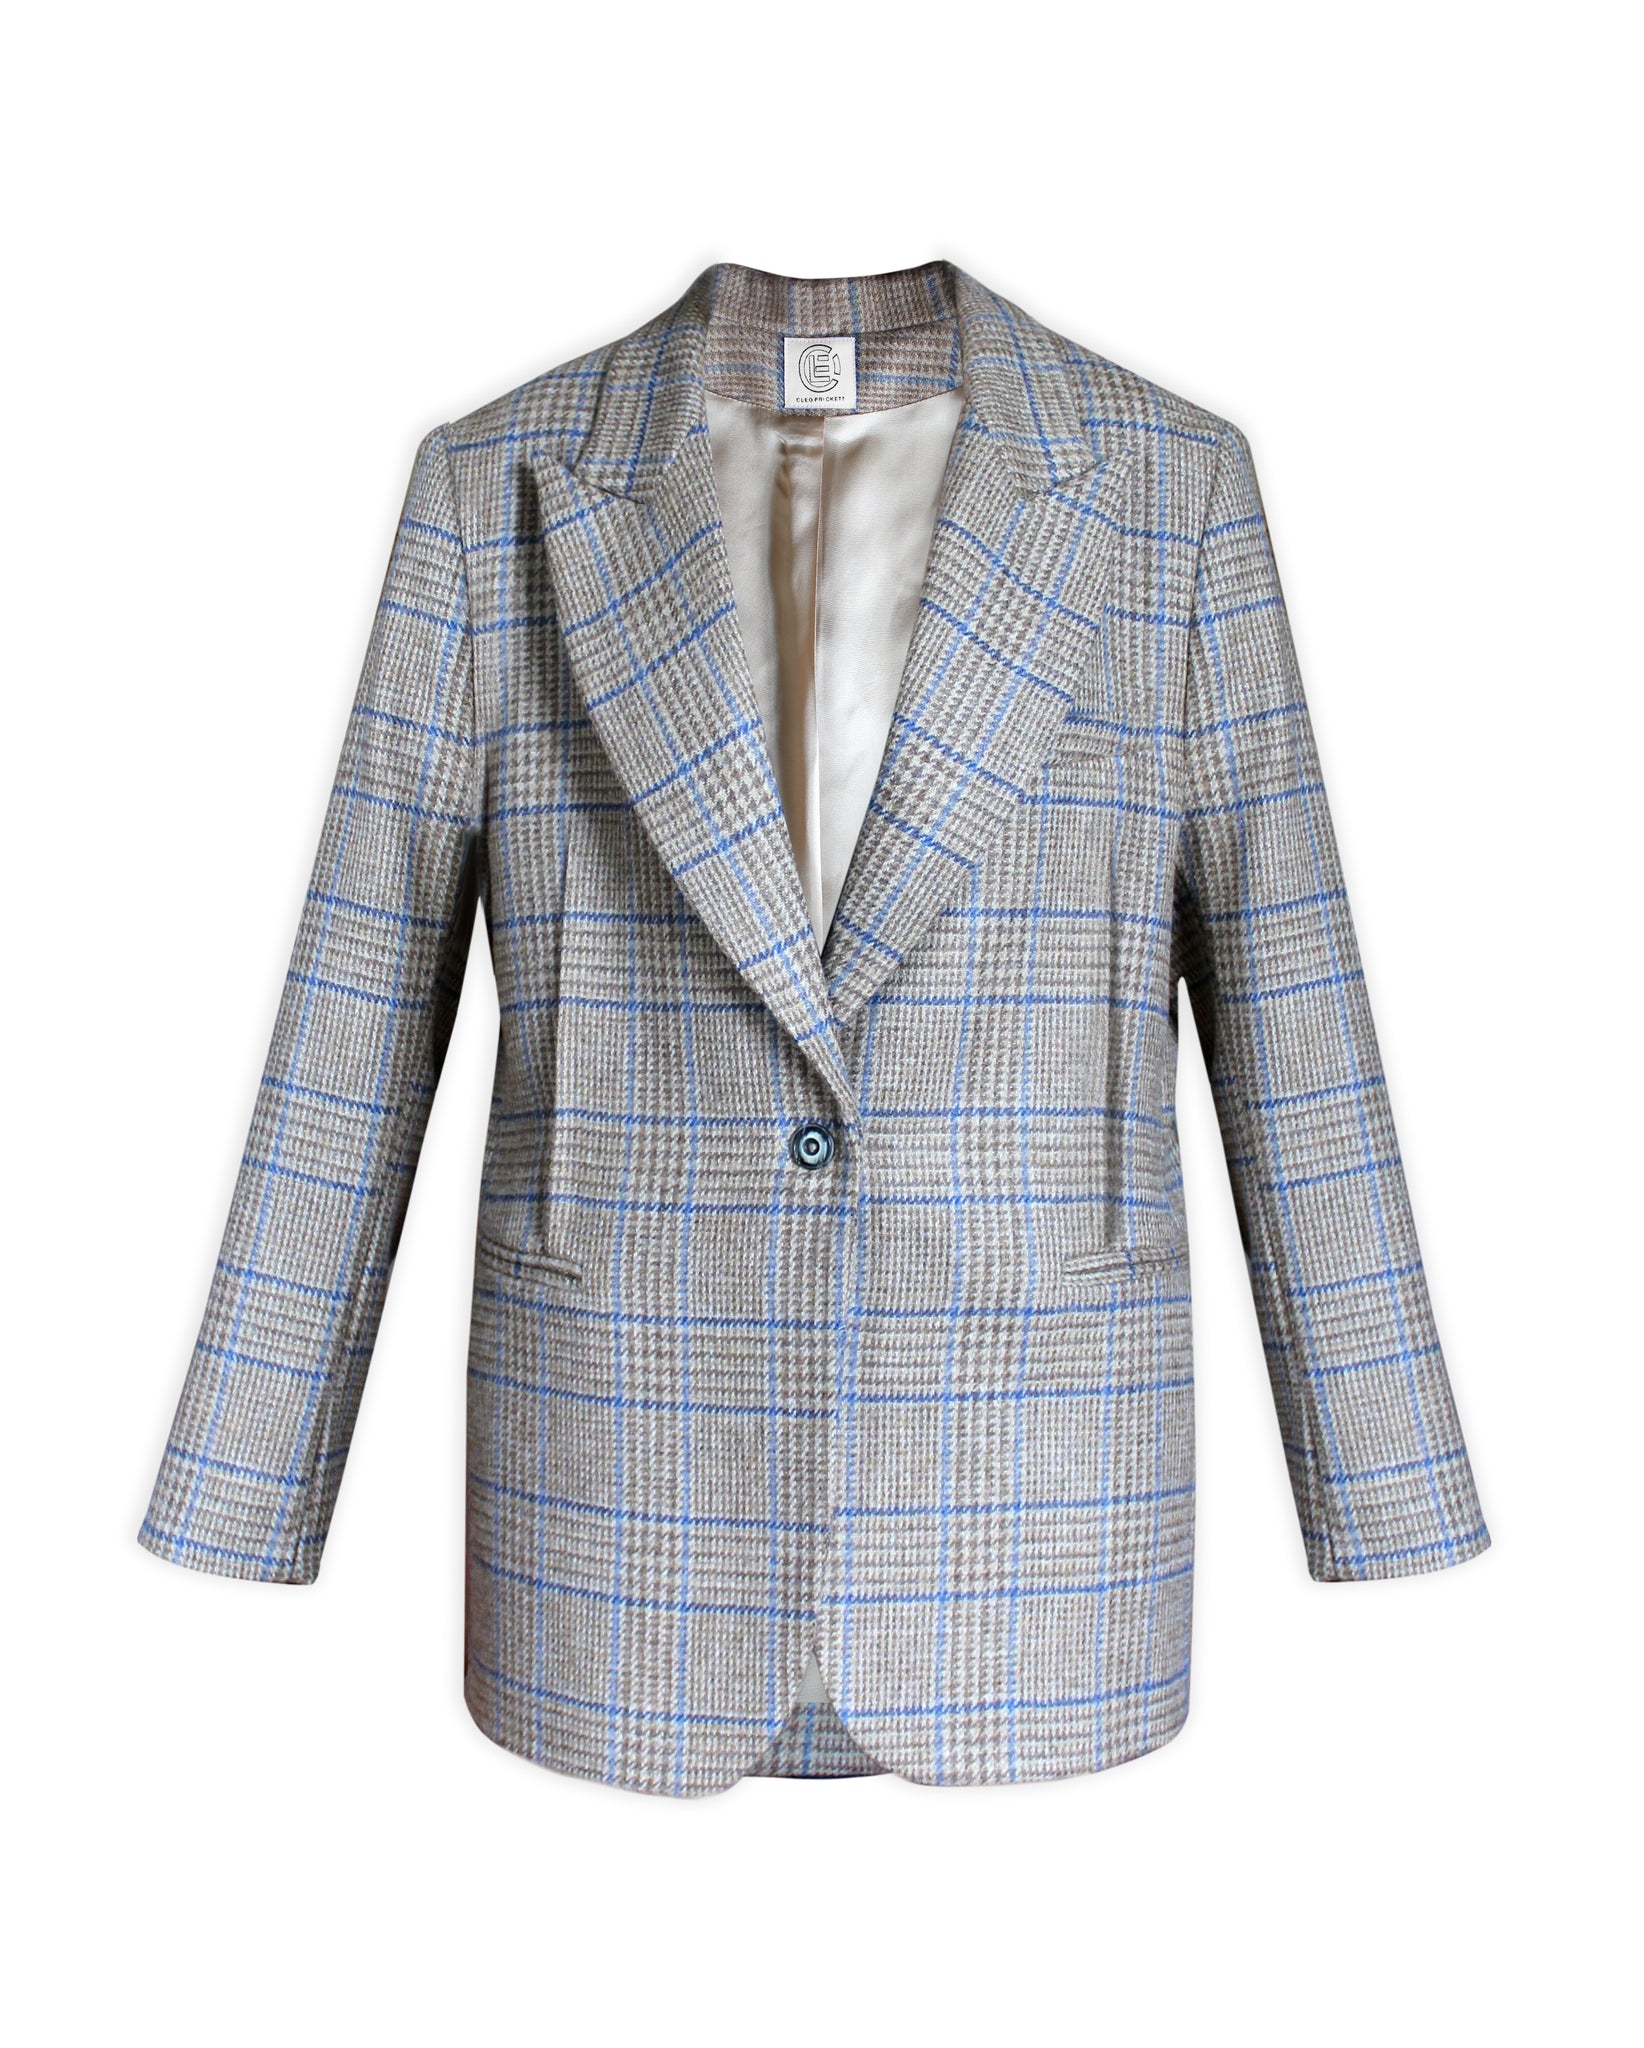 The Yaddi Jacket in Magee's lambswool, contemporary check